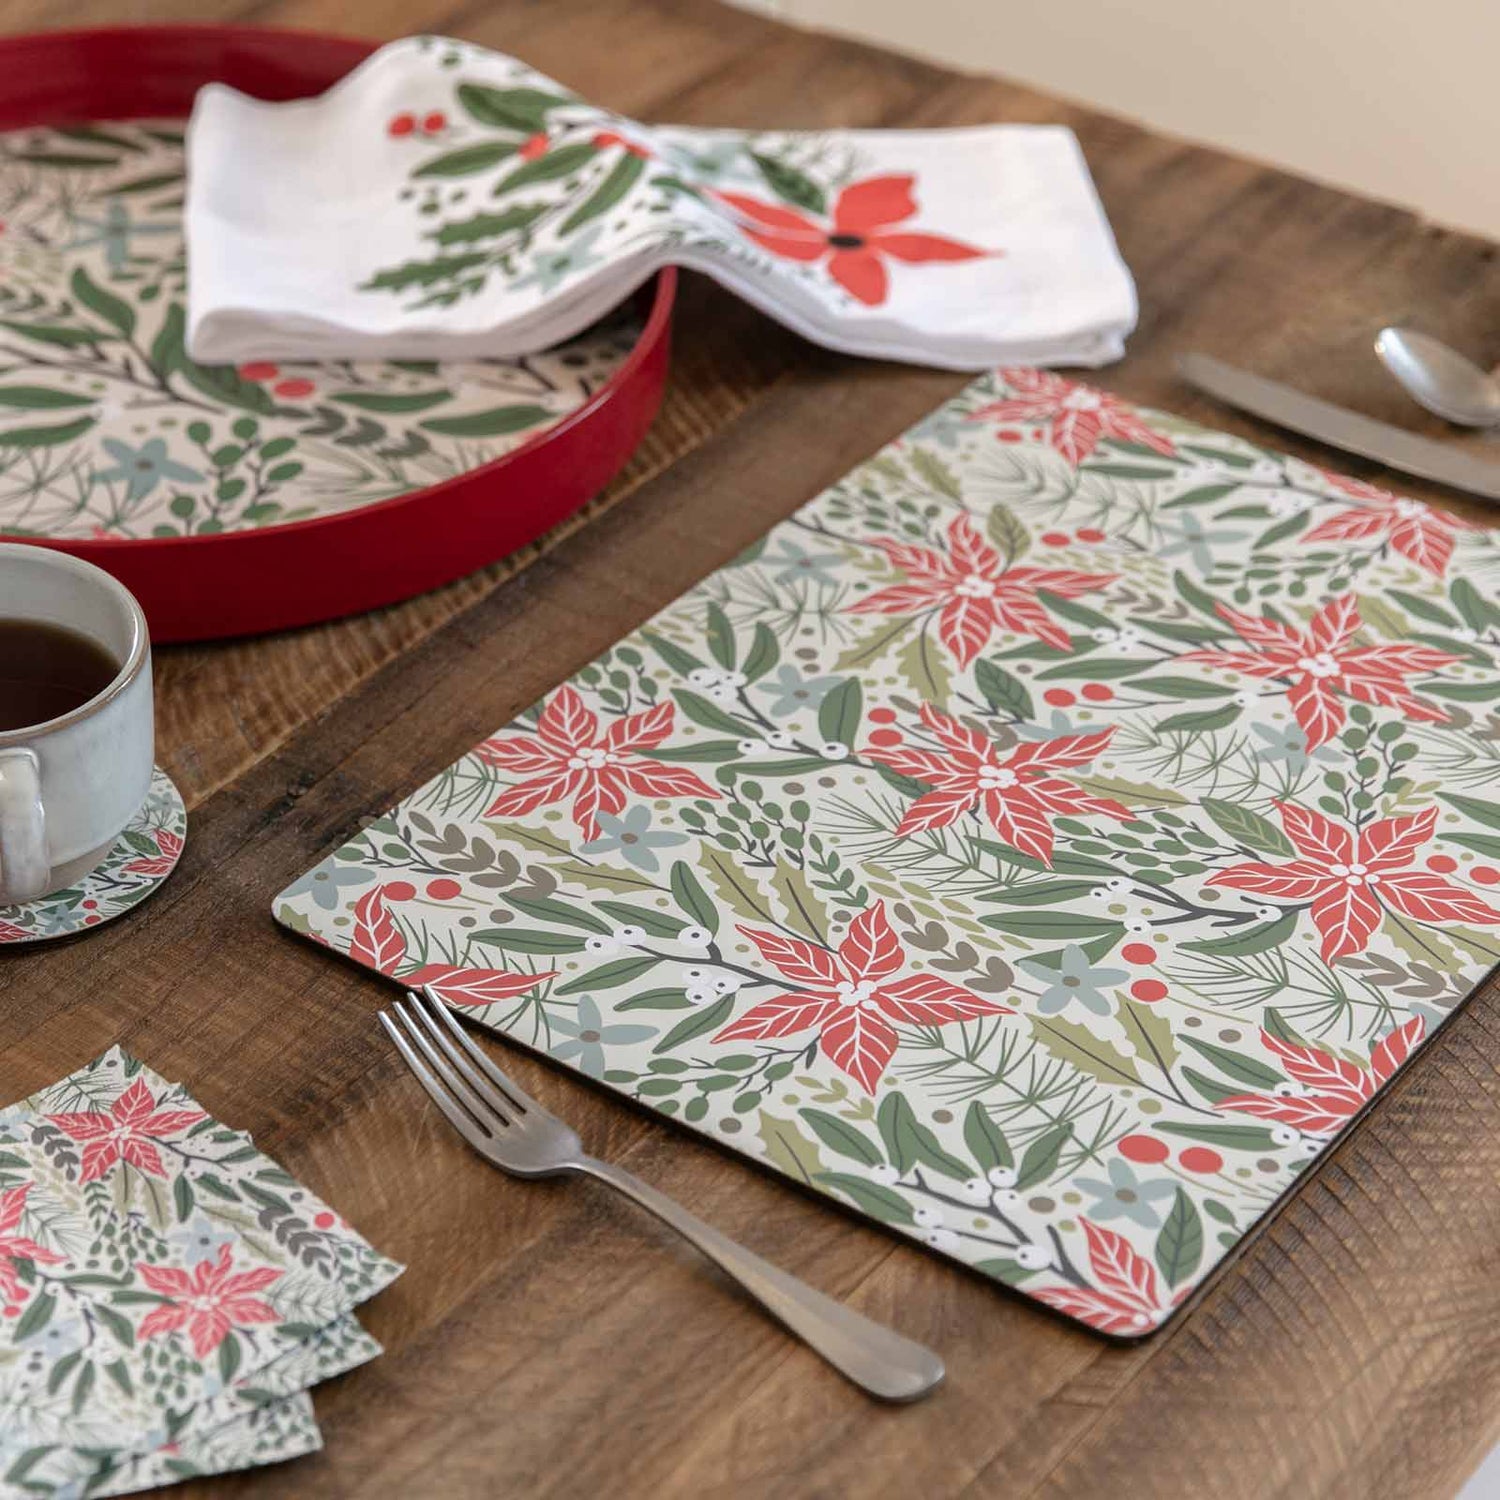 Holiday Poinsettia Art Placemats - Set of 4 Placemat - rockflowerpaper